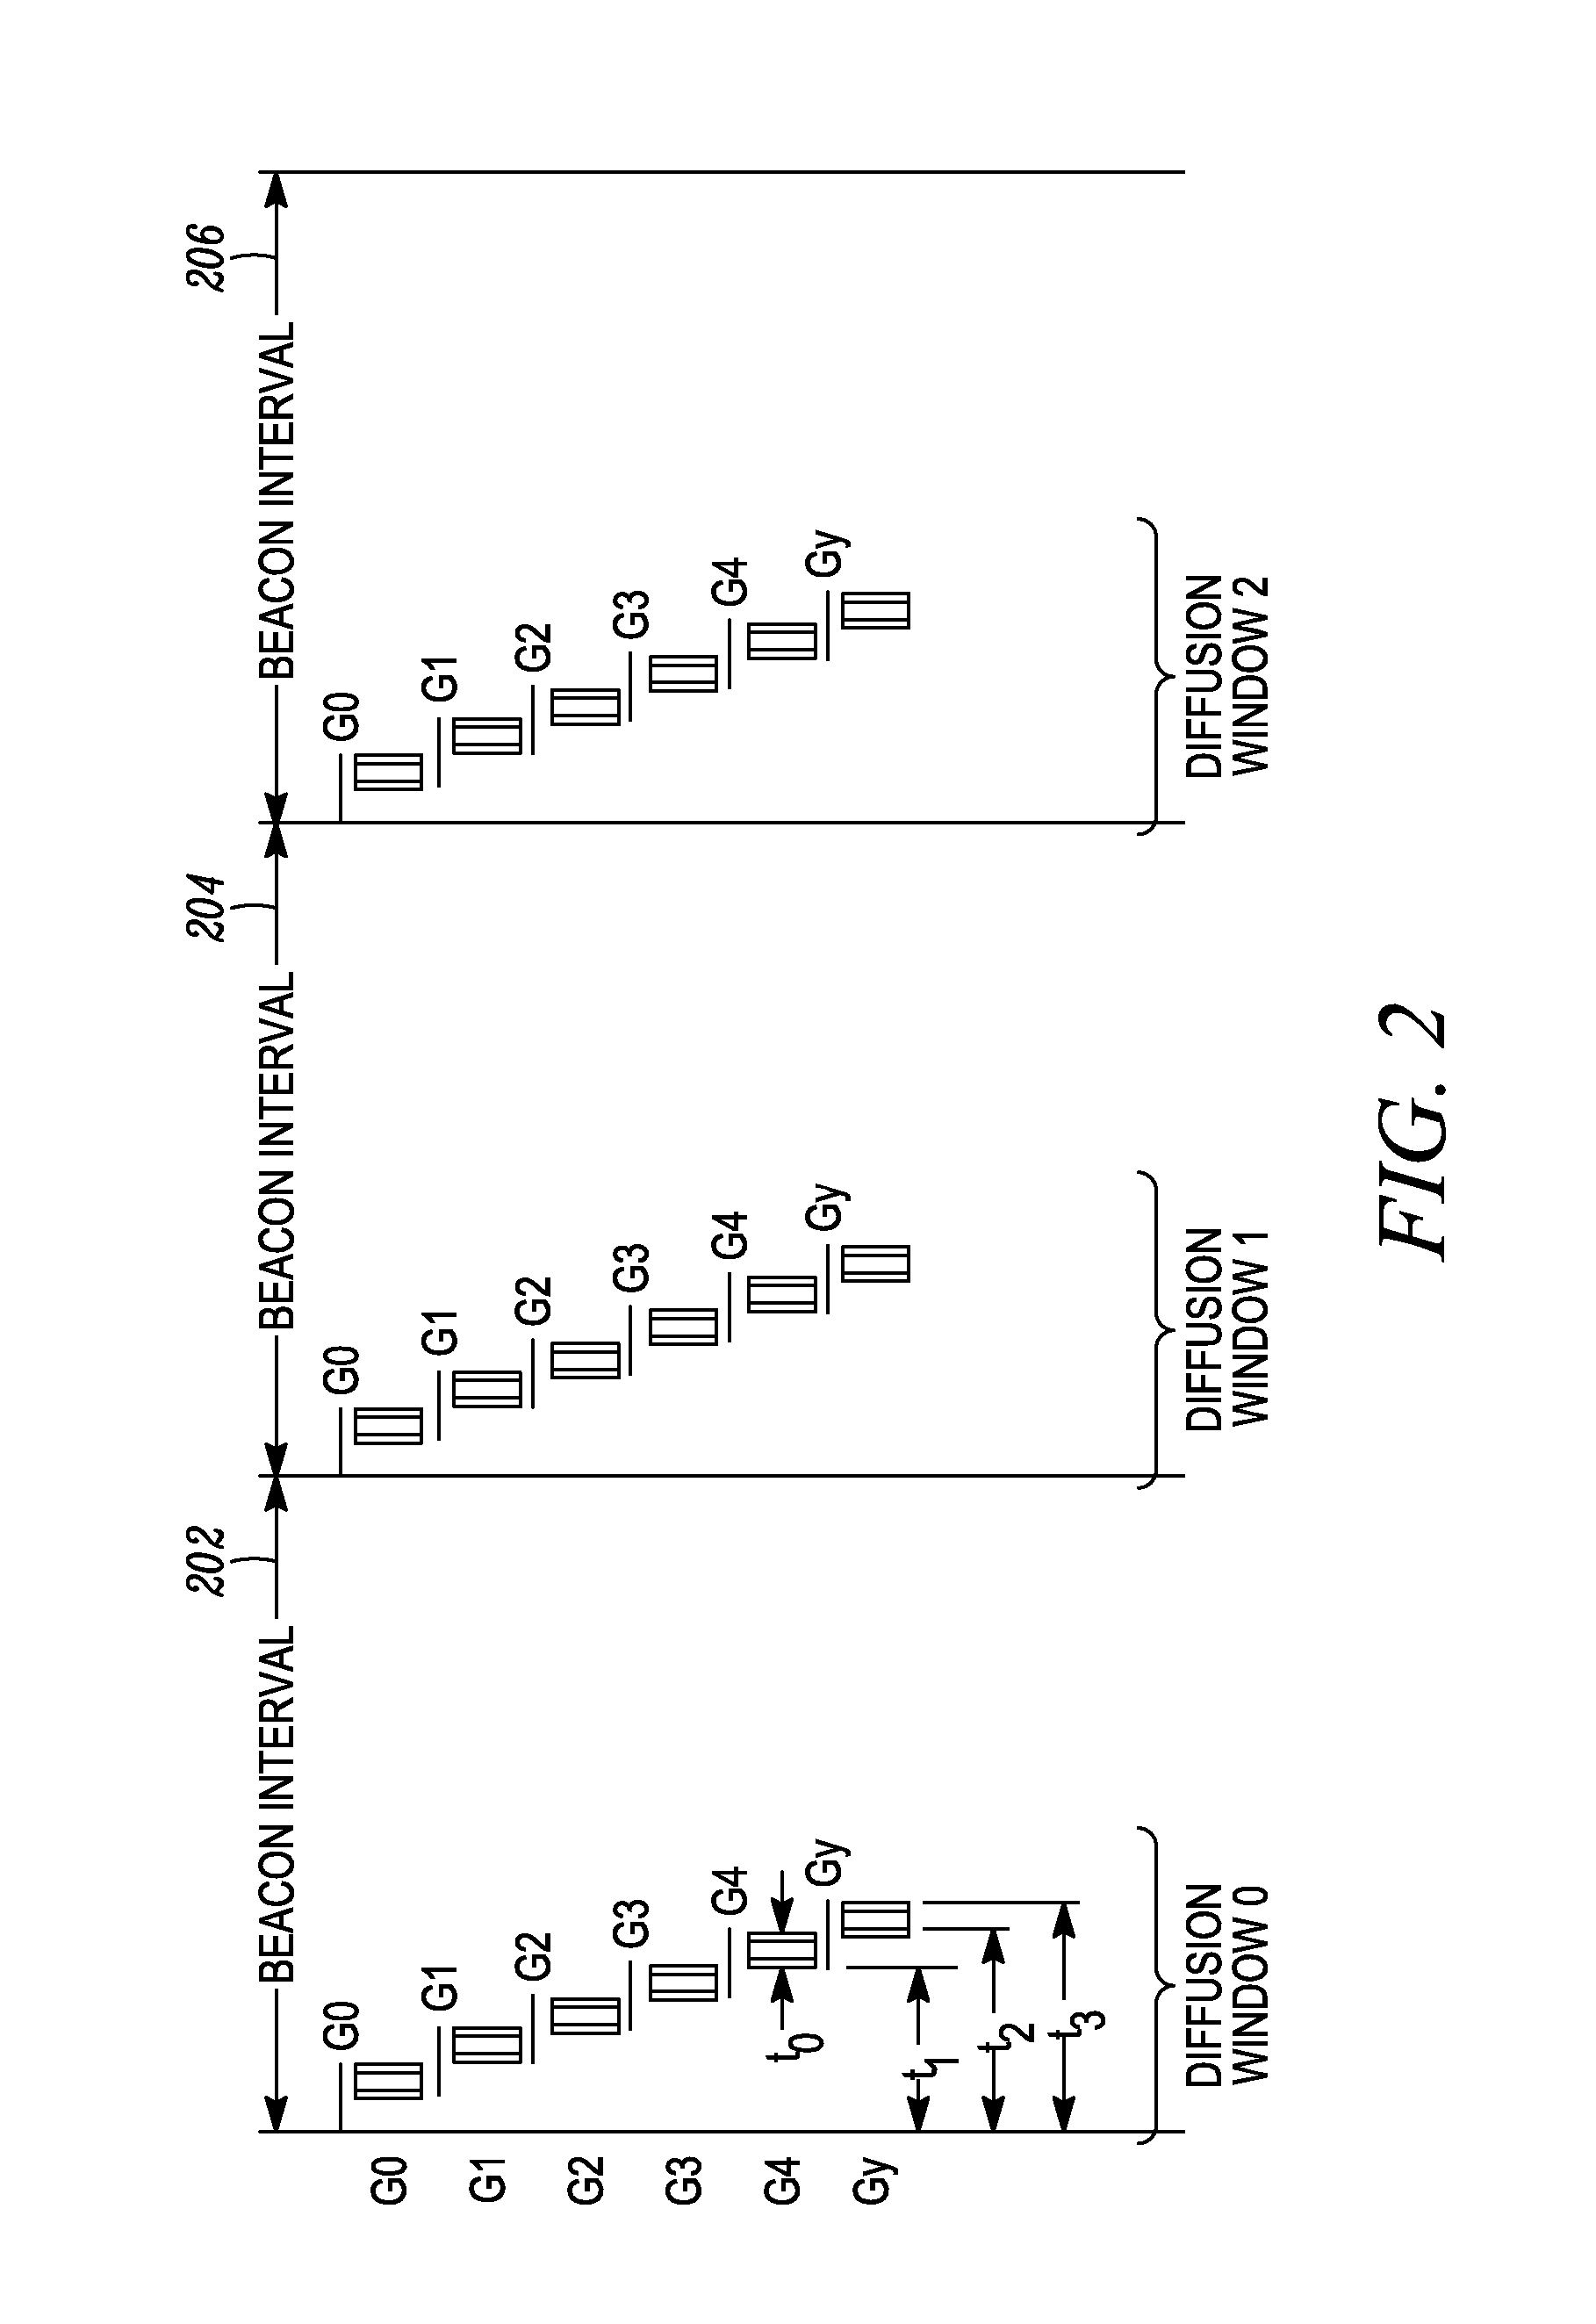 Method and apparatus for tracking a channel timing channel message and supporting channel scanning in a digital mobile radio system